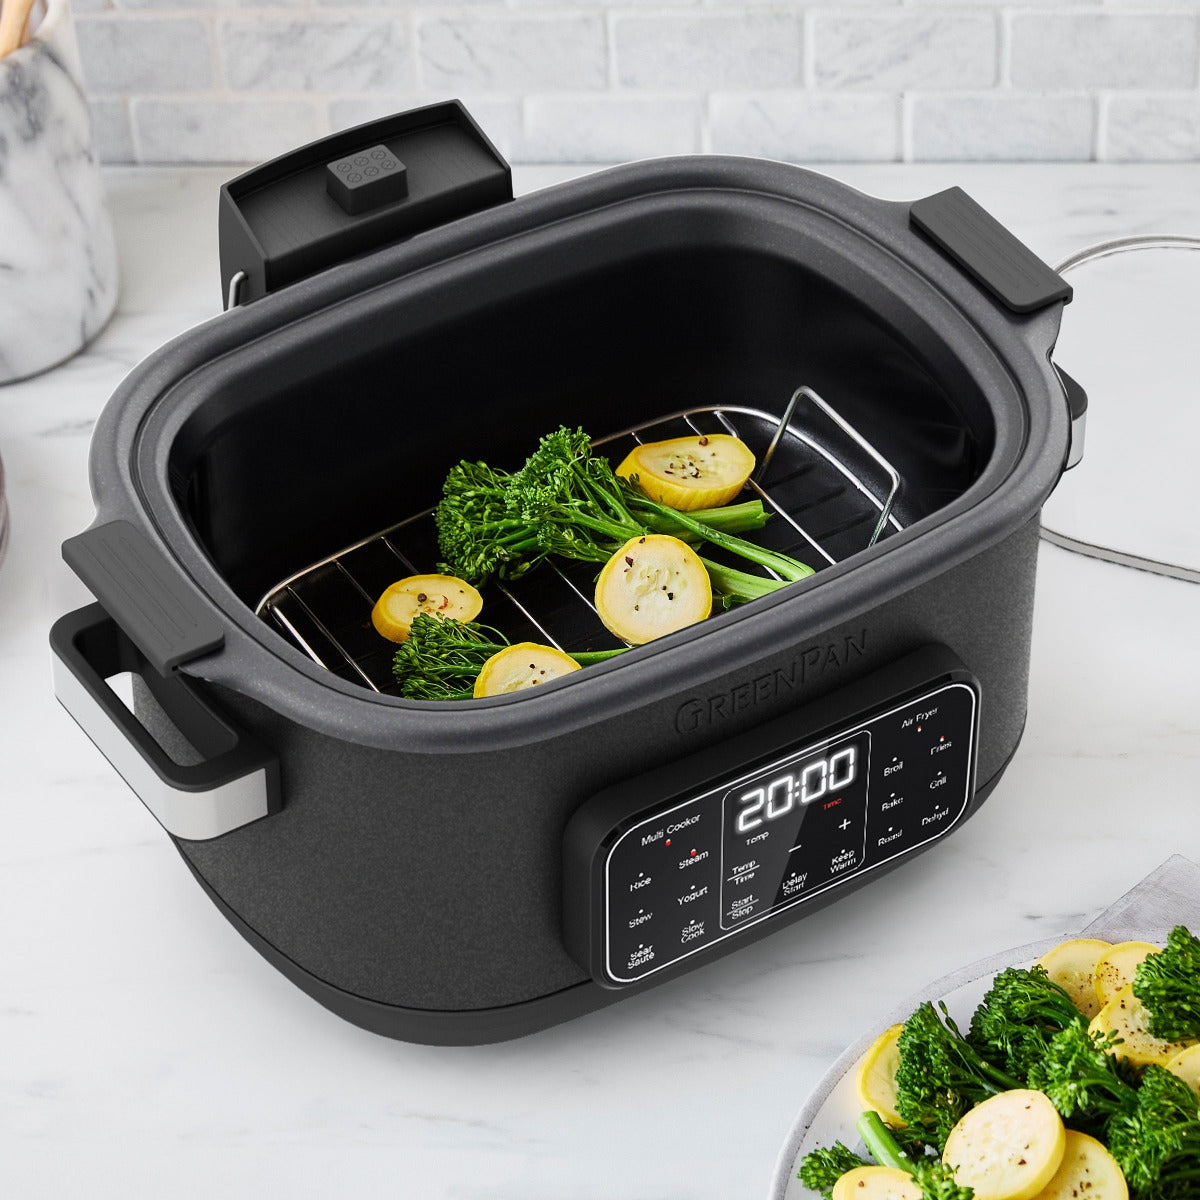  GreenPan Matte Black 13-in-1 Air Fryer Slow Cooker & Grill,  Presets to Steam Saute Broil Bake and Cook Rice, Healthy Ceramic Nonstick  and Dishwasher Safe Parts, Easy-to-use LED Display: Home 